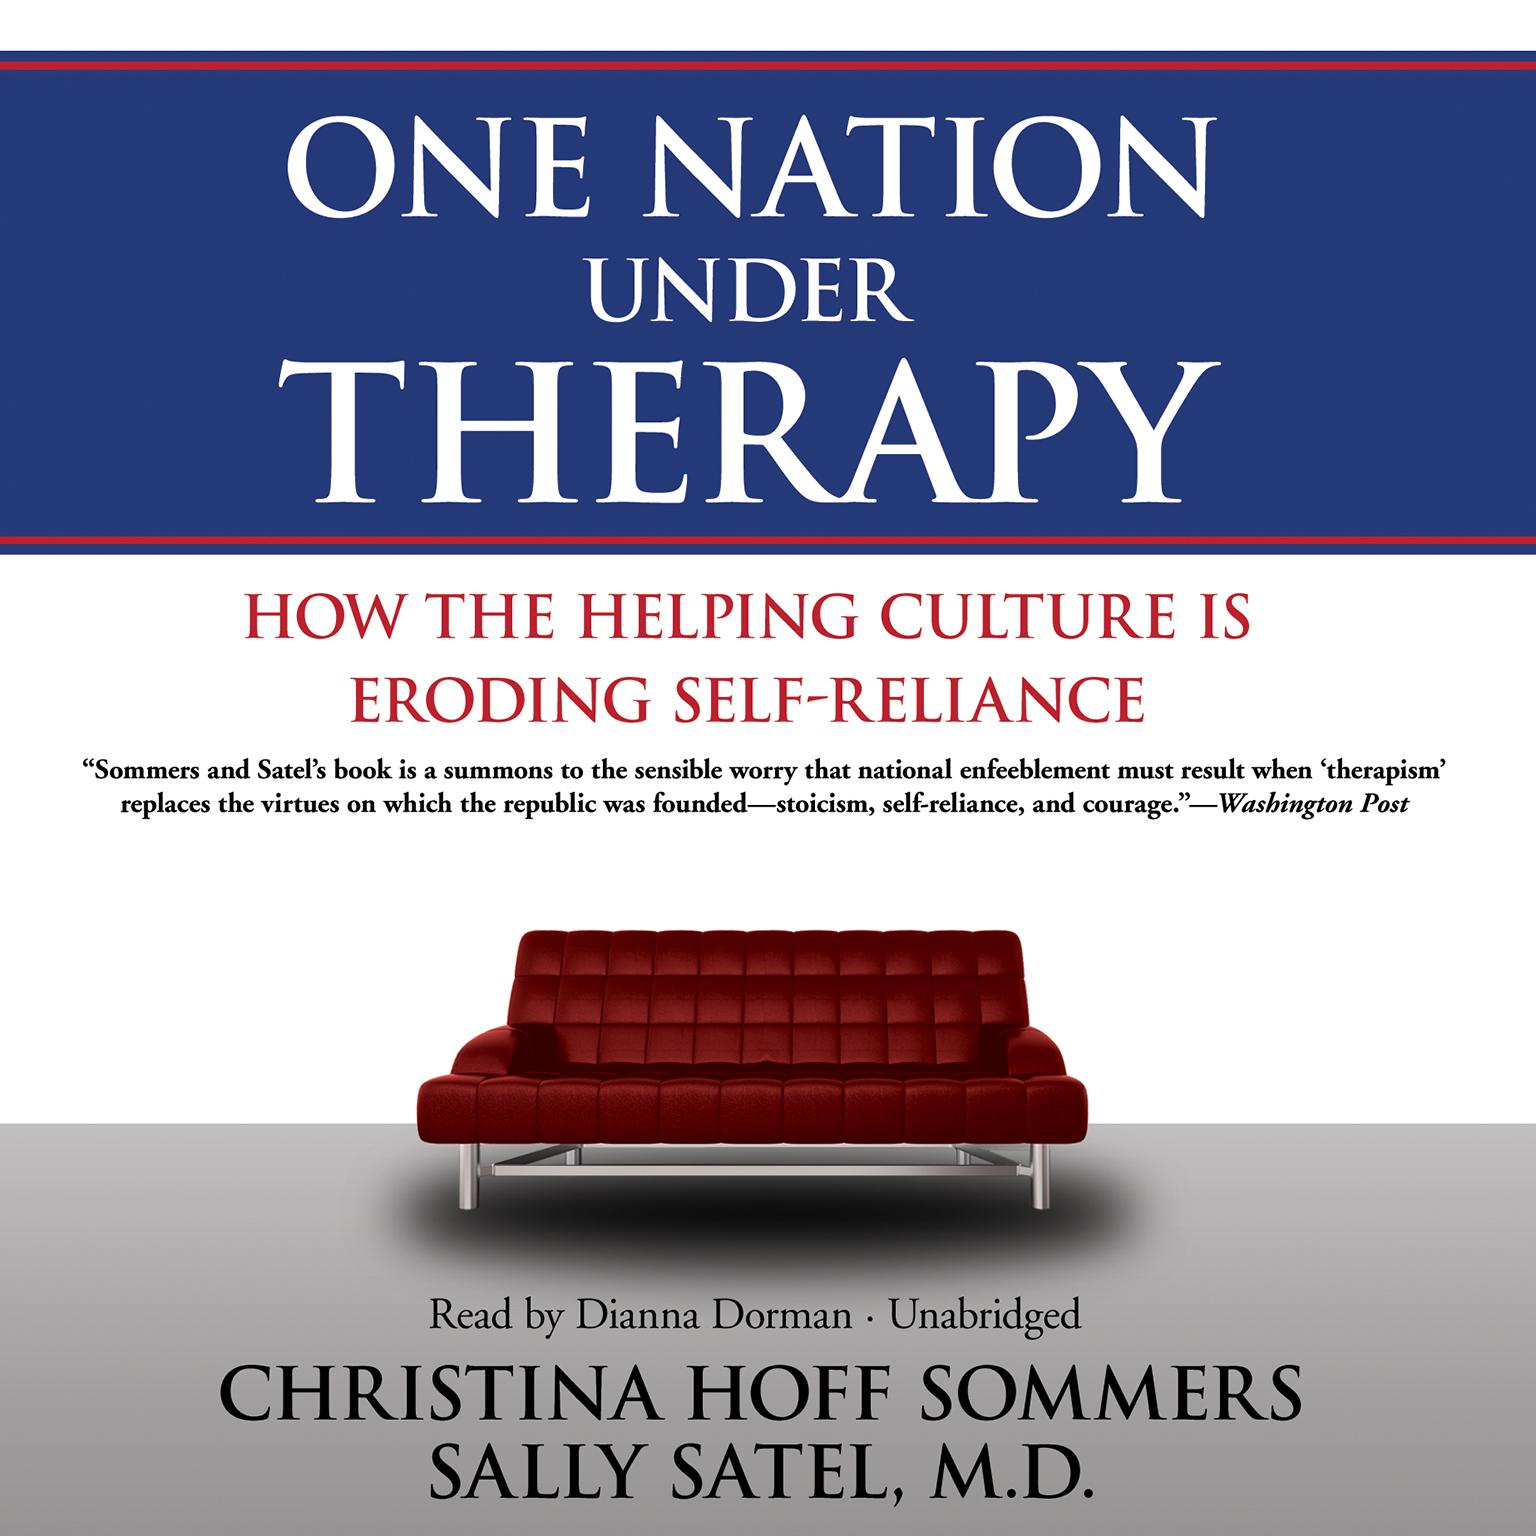 One Nation Under Therapy: How the Helping Culture Is Eroding Self-Reliance Audiobook, by Christina Hoff Sommers